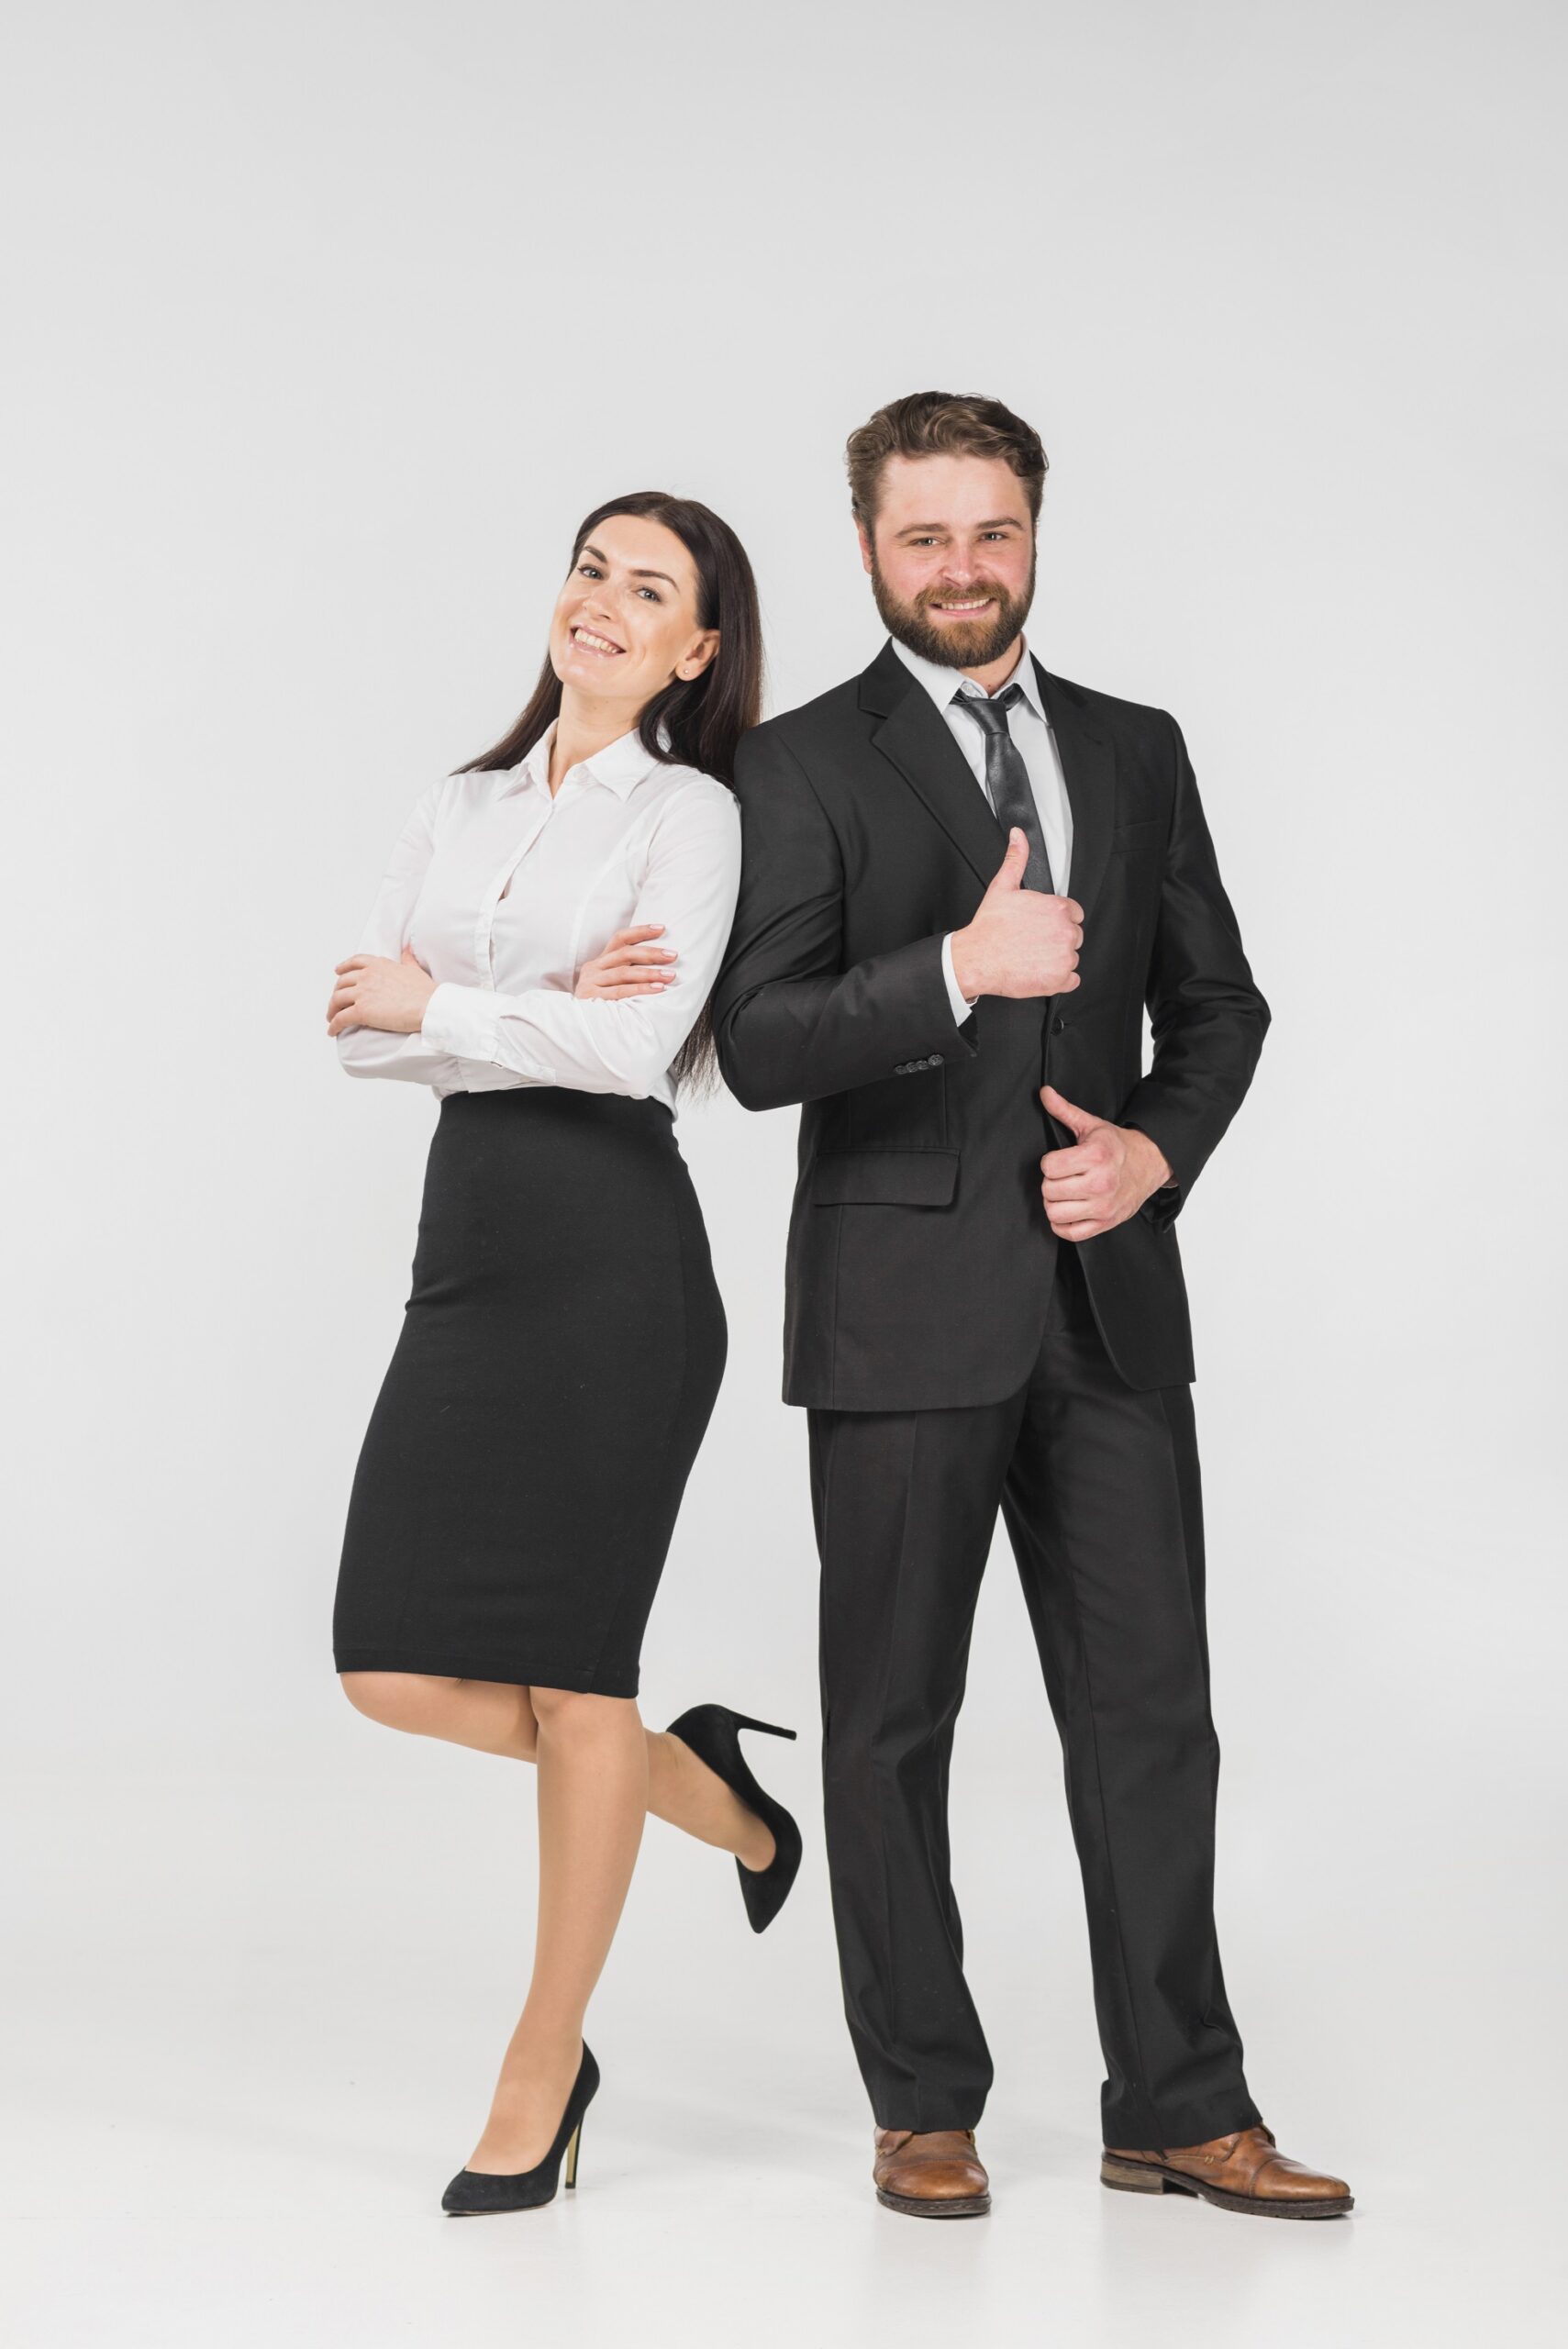 colleagues-man-and-woman-leaning-on-each-other-and-smiling40